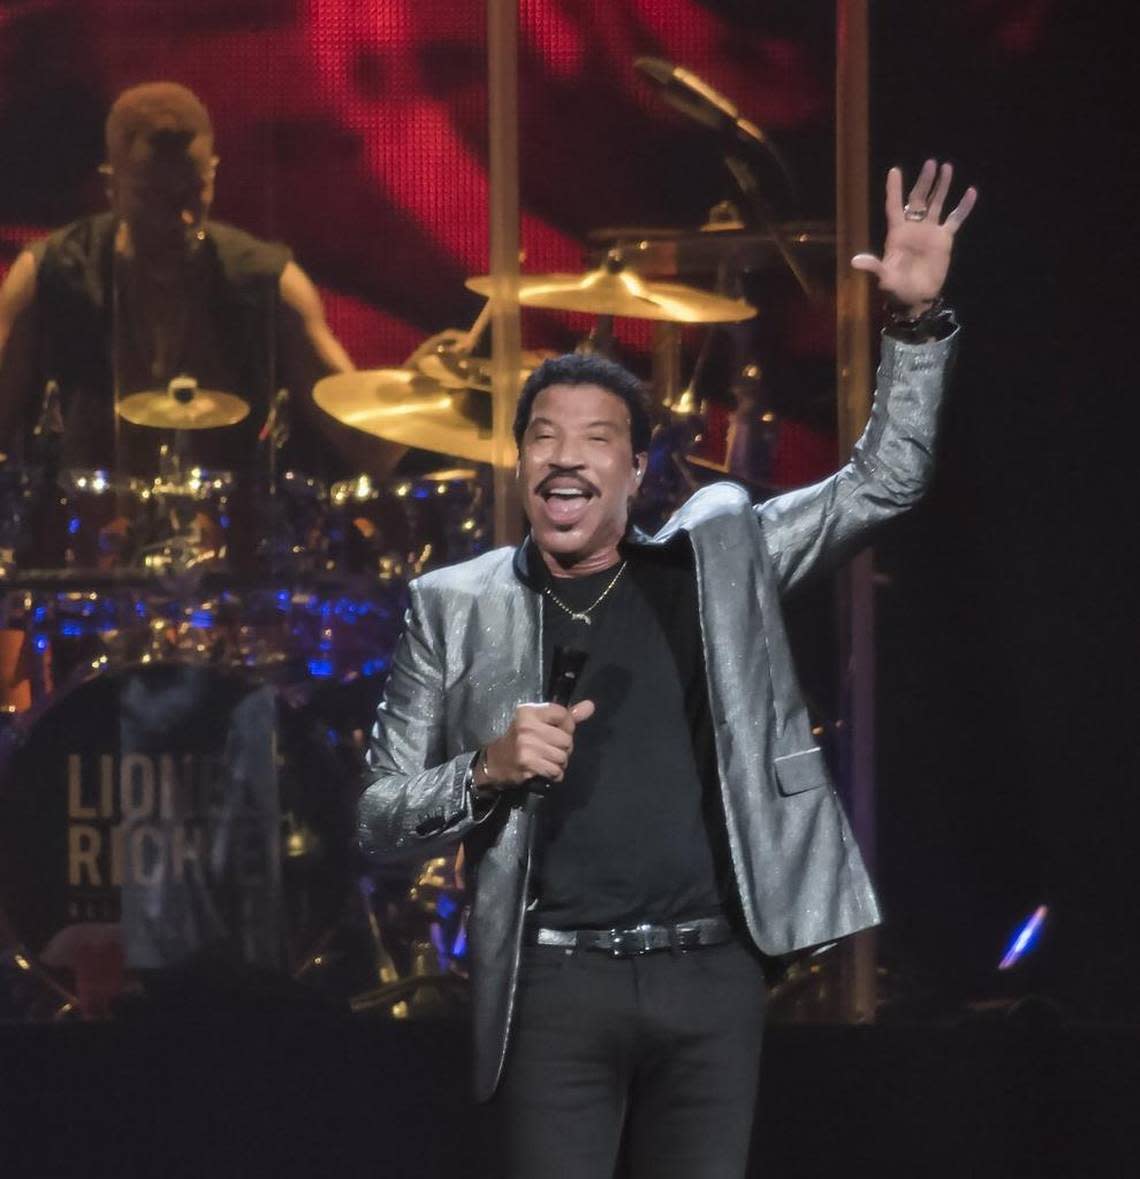 Lionel Richie, with support from Earth, Wind & Fire, will perform June 6 at the T-Mobile Center. General ticket sales will begin Jan. 19.